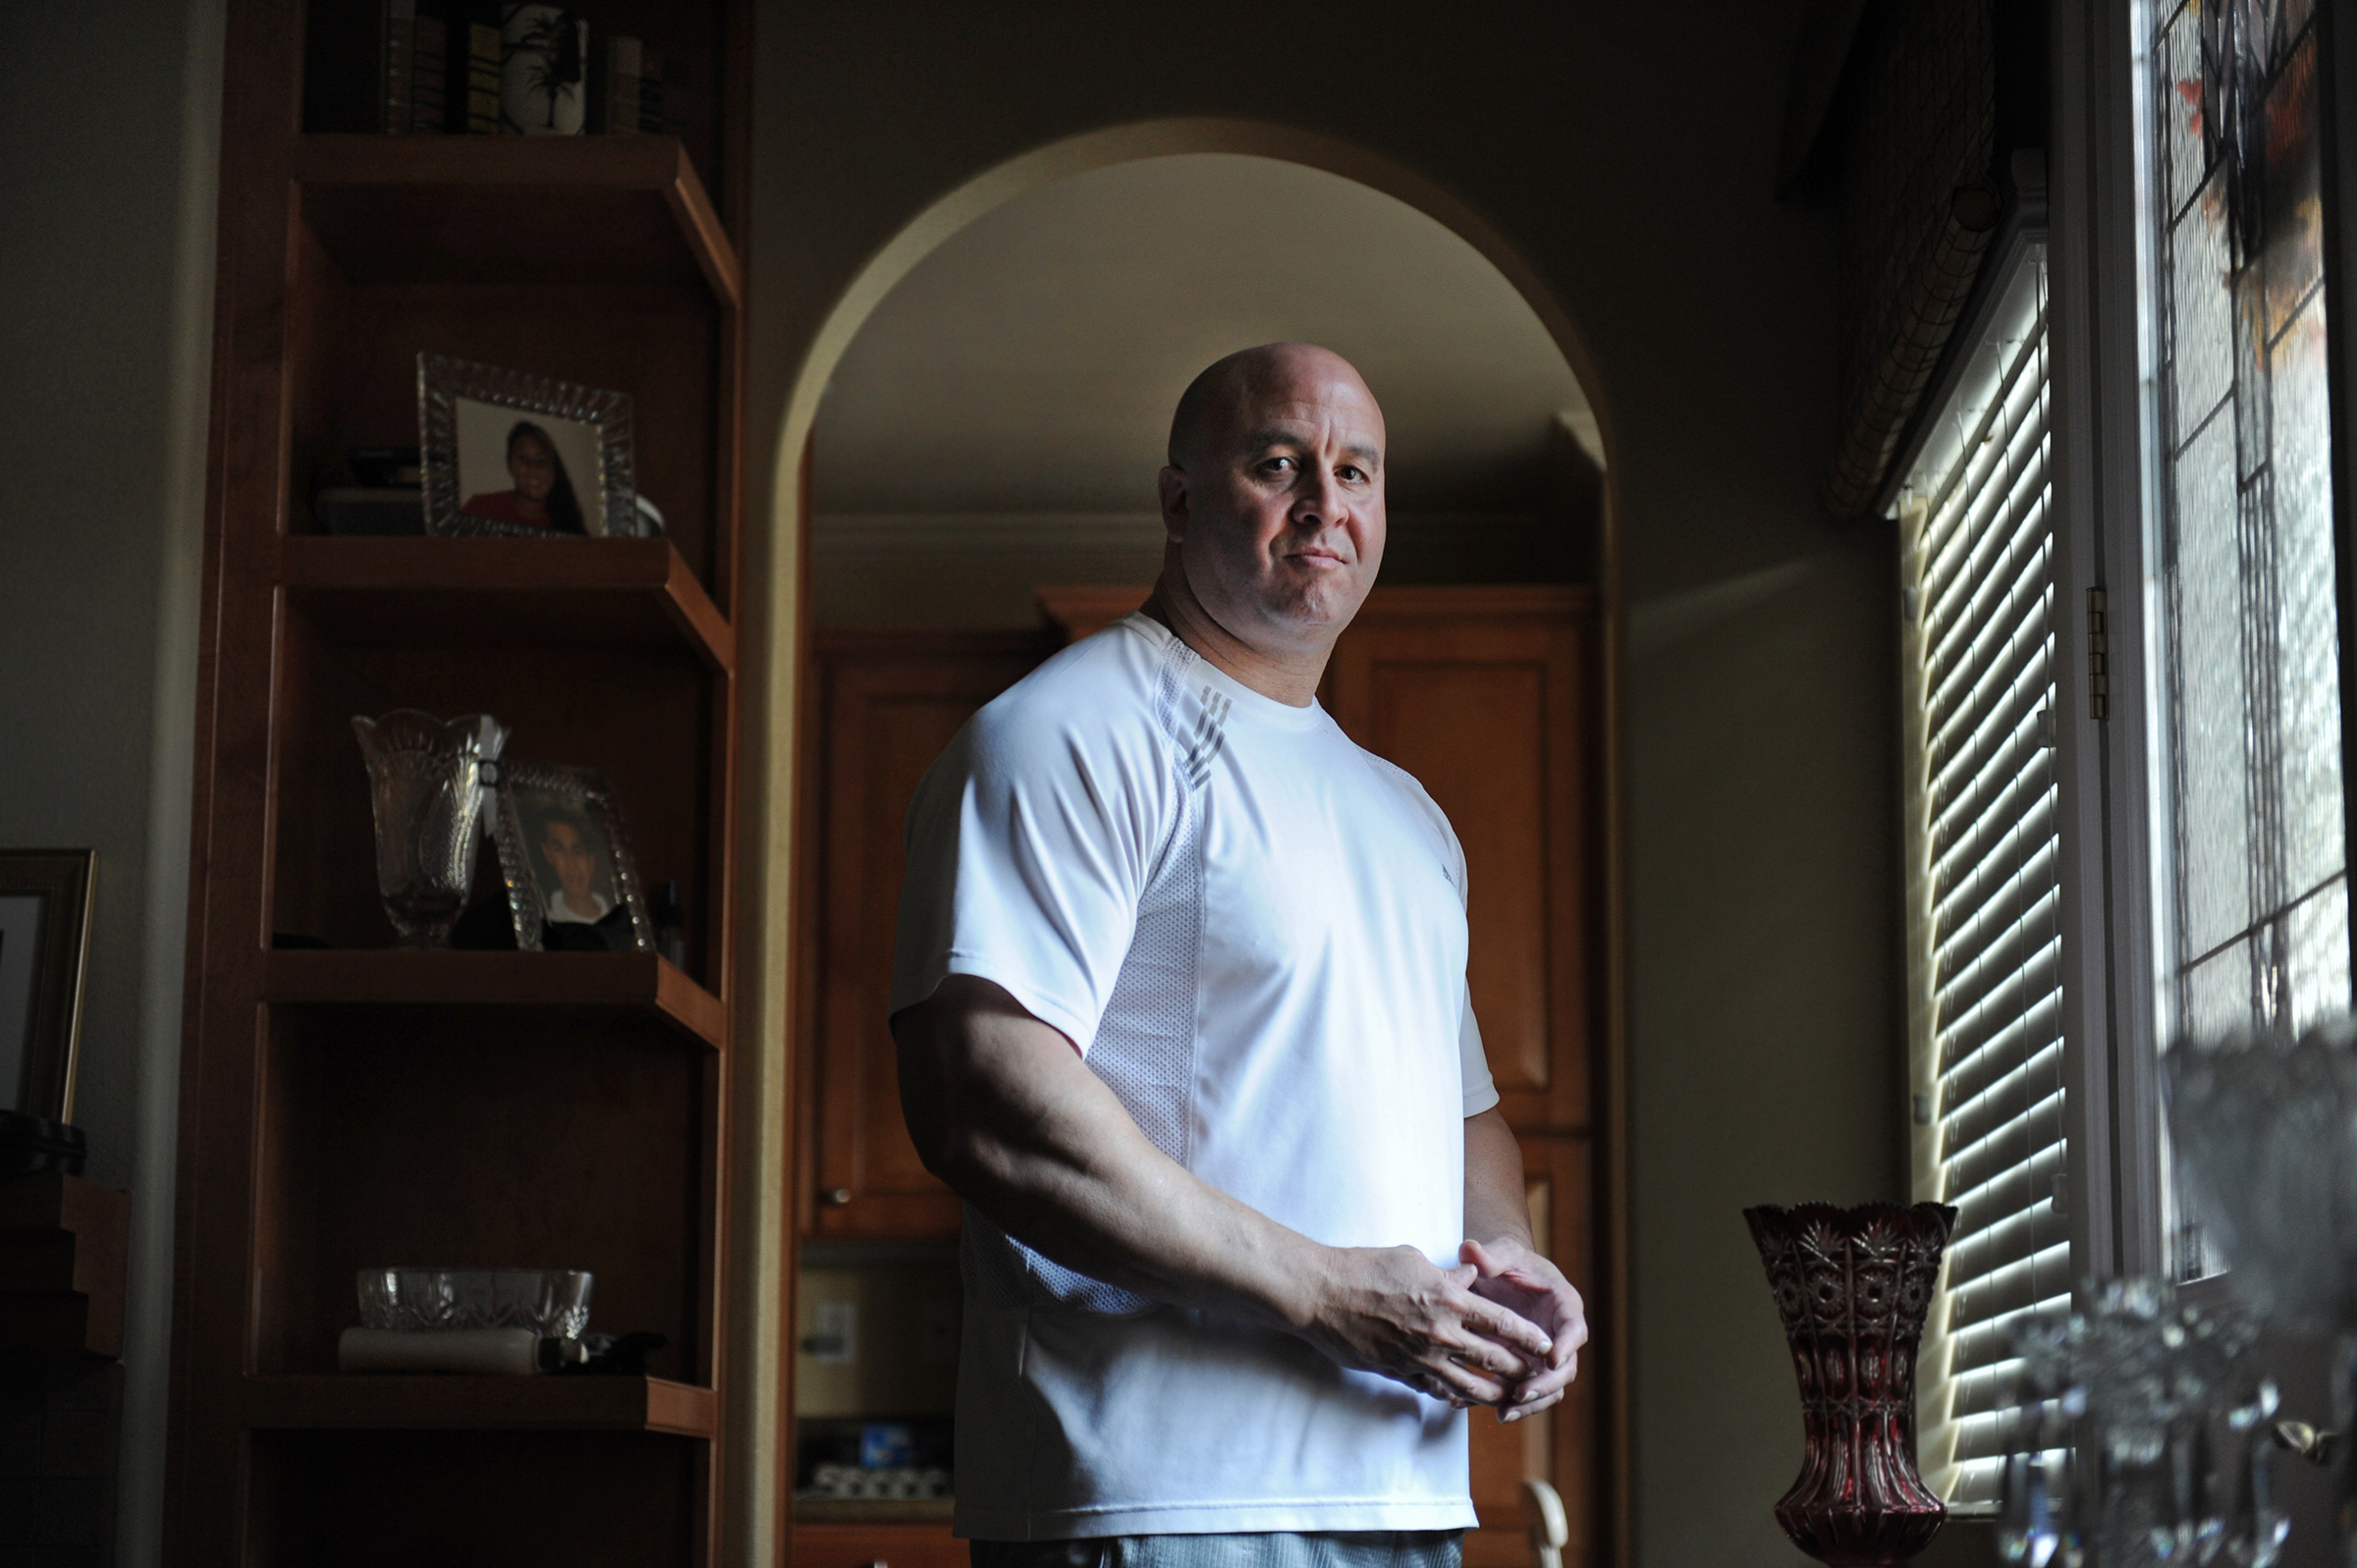 Craig Monteilh, a former FBI informant who infiltrated mosques around the Los Angeles area, at his home in Irvine, Calif., on Nov. 14, 2010. (Jahi Chikwendiu—The Washington Post/Getty Images)